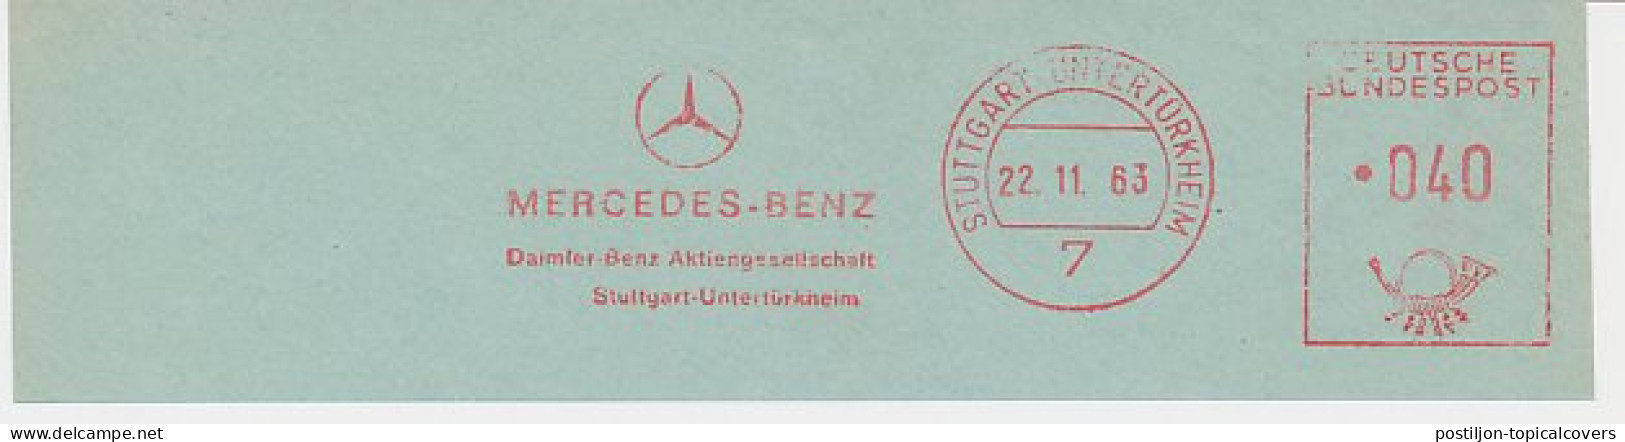 Meter Cut Germany 1963 Car - Mercedes Benz - Coches